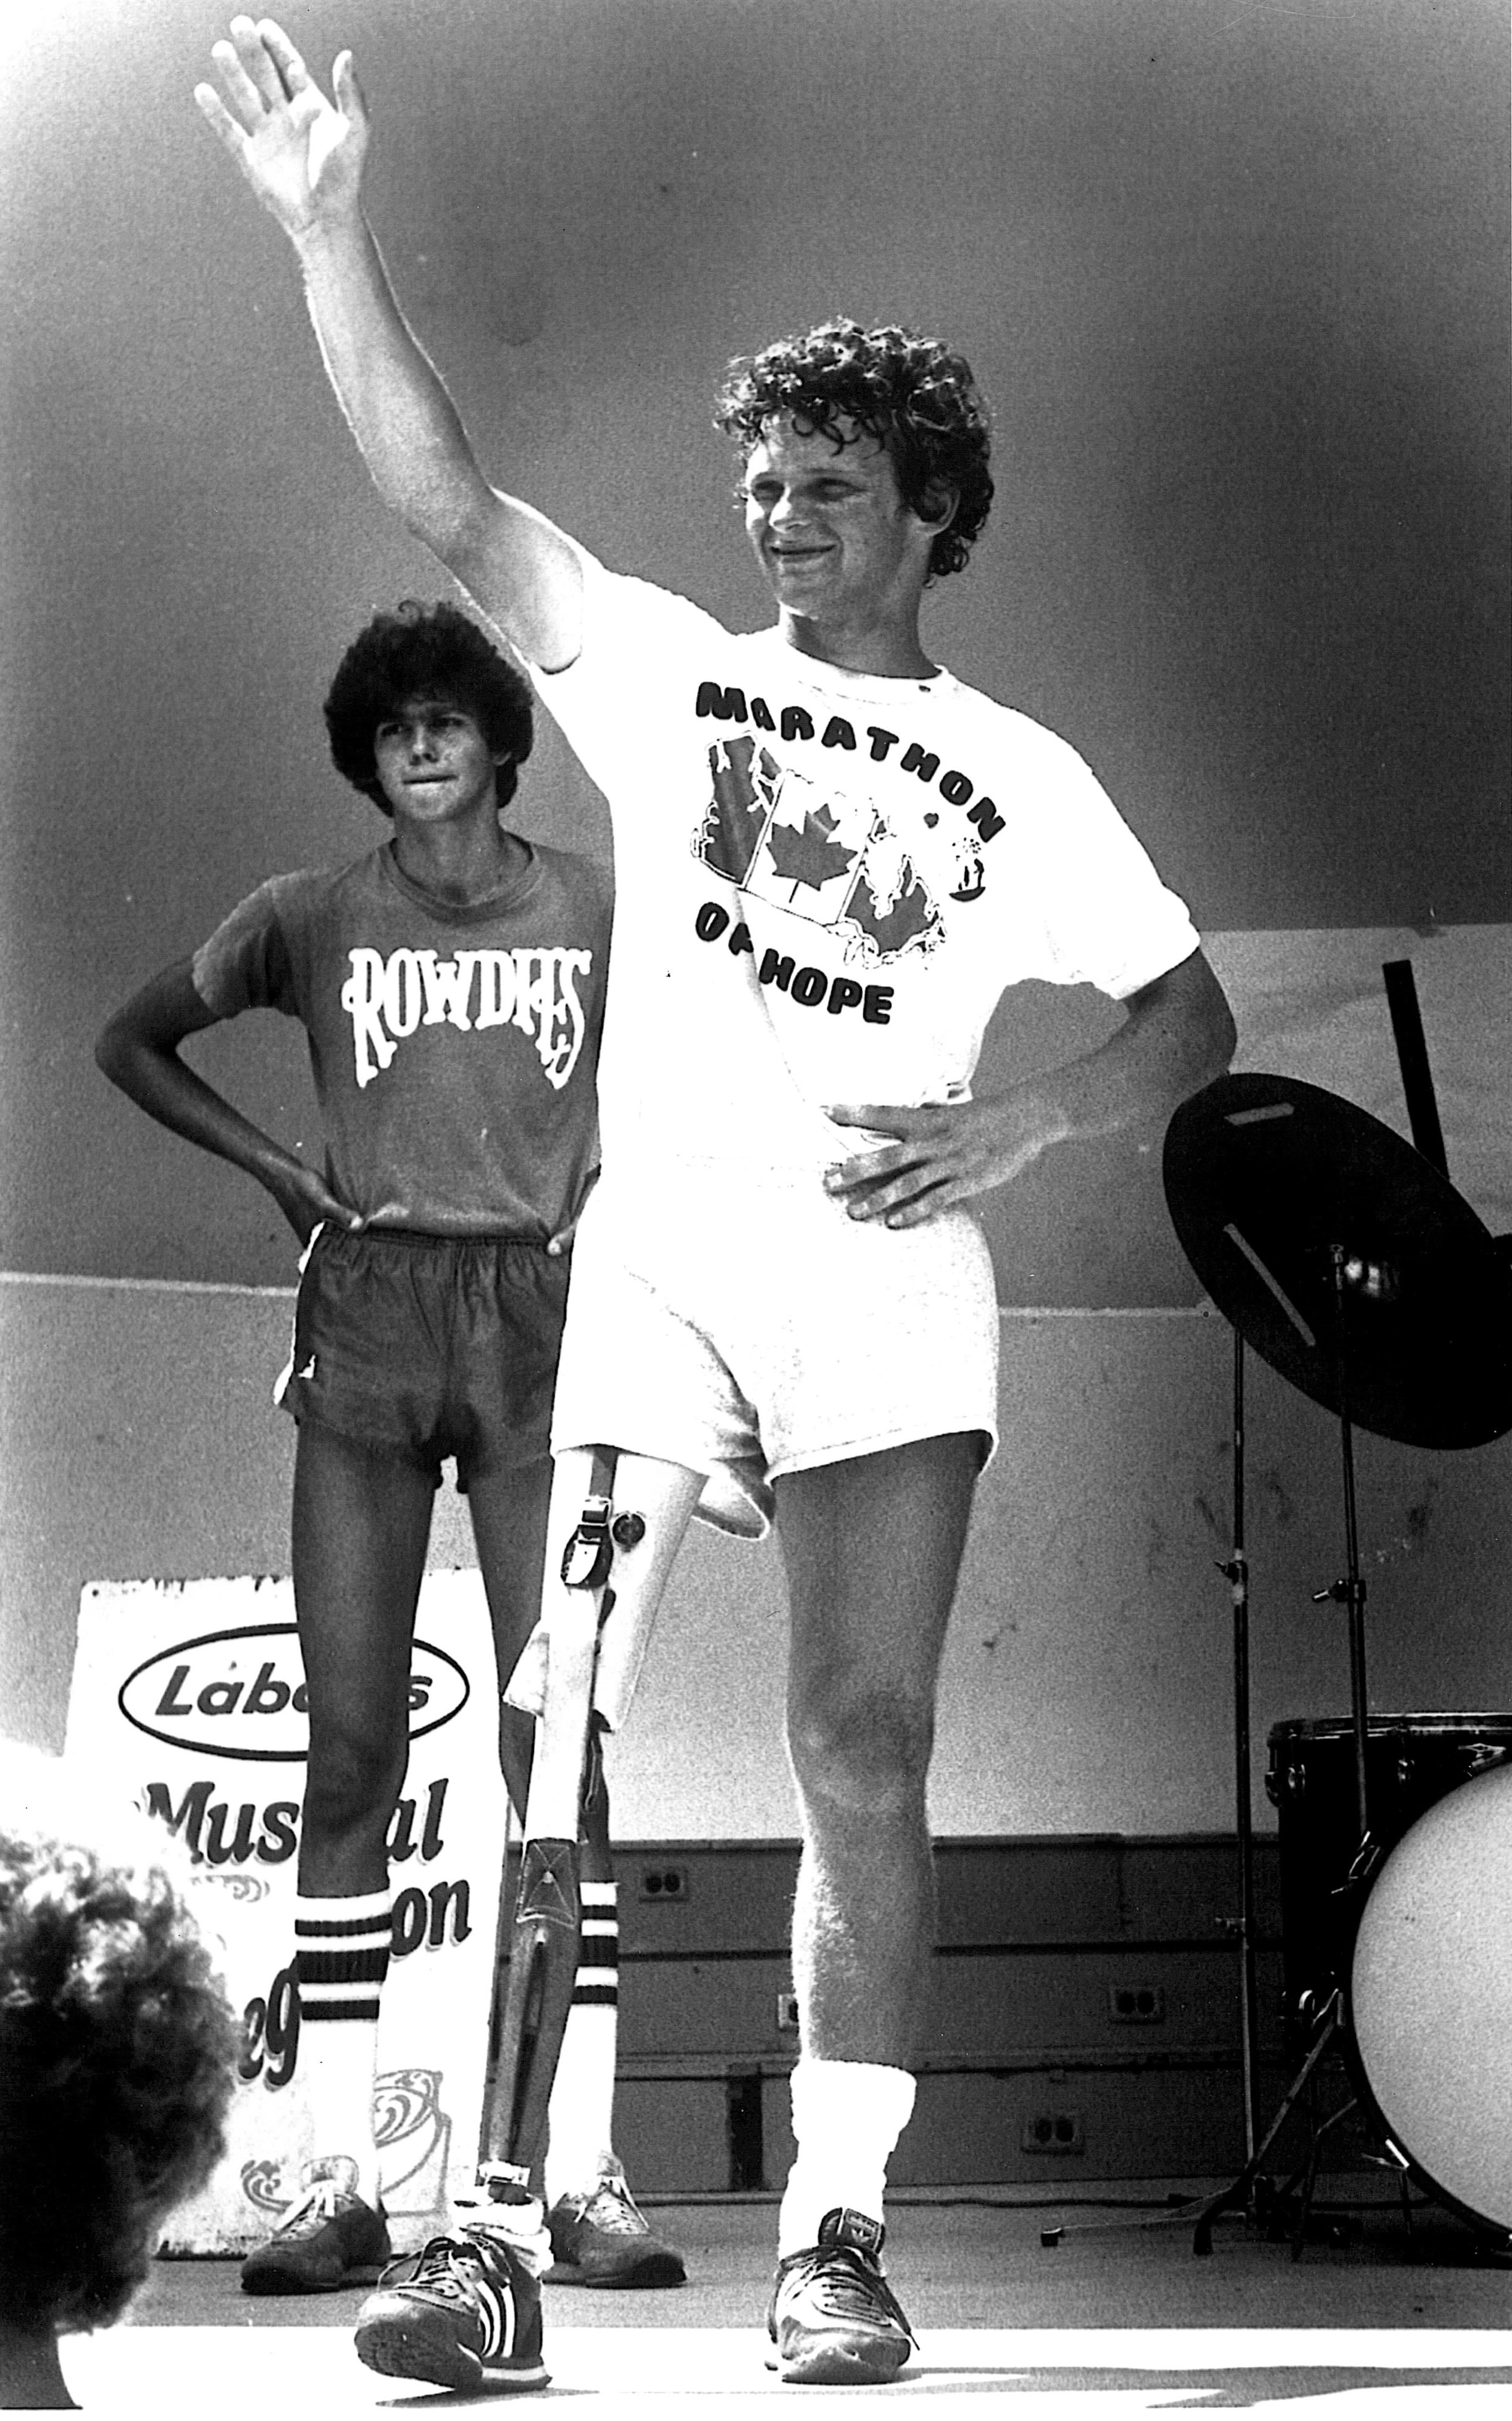 Terry Fox in London, Ontario, July 17, 1980